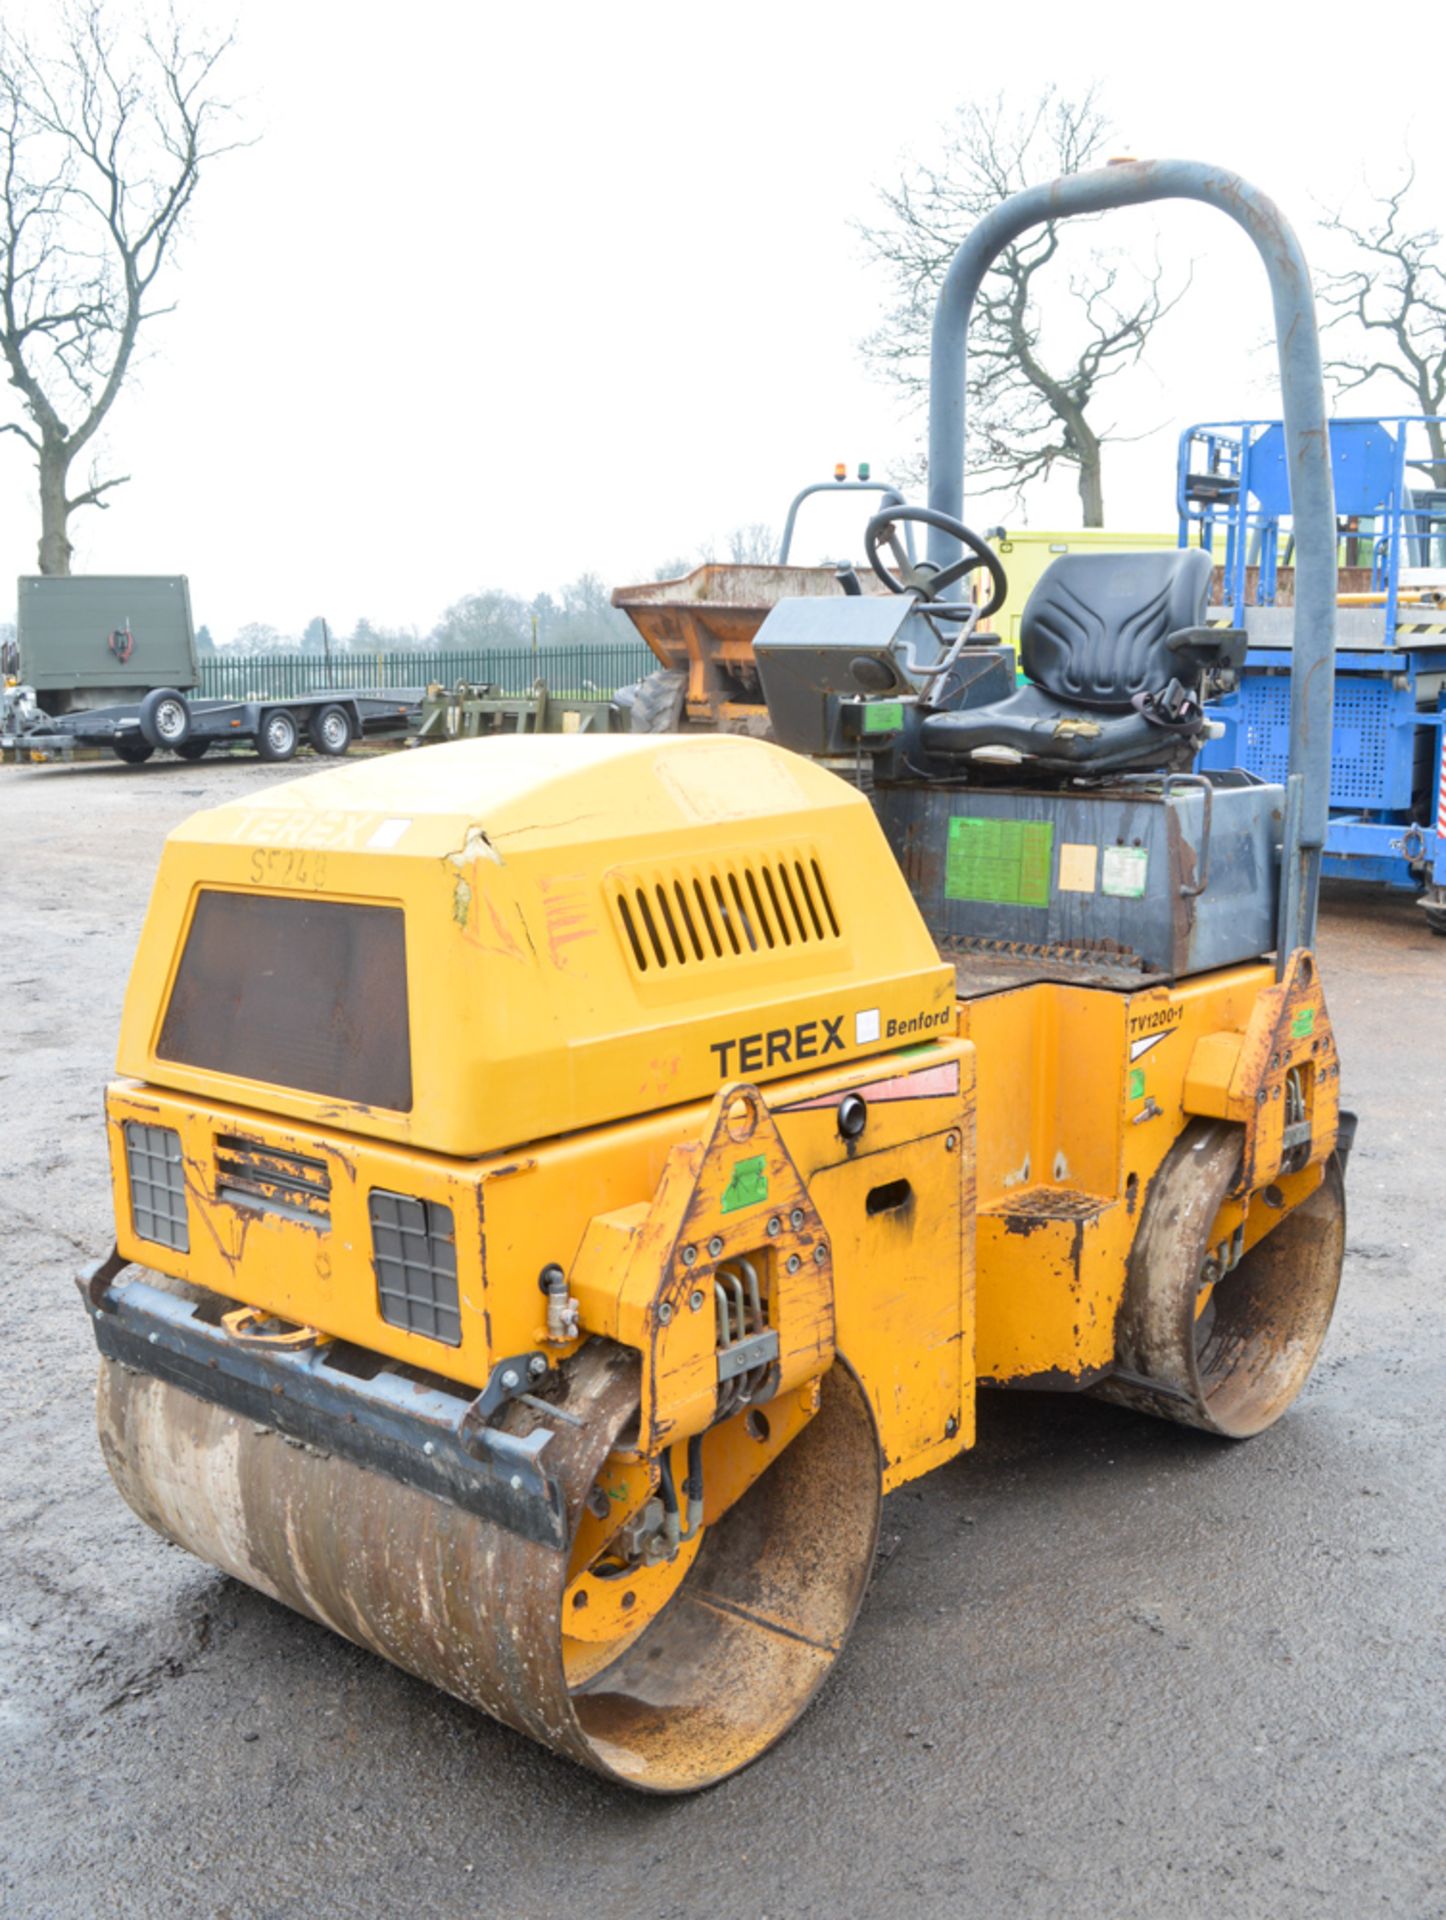 Benford Terex TV1200-1 double drum ride on roller Year: 2004 S/N: E404CC101 Recorded Hours: 1804